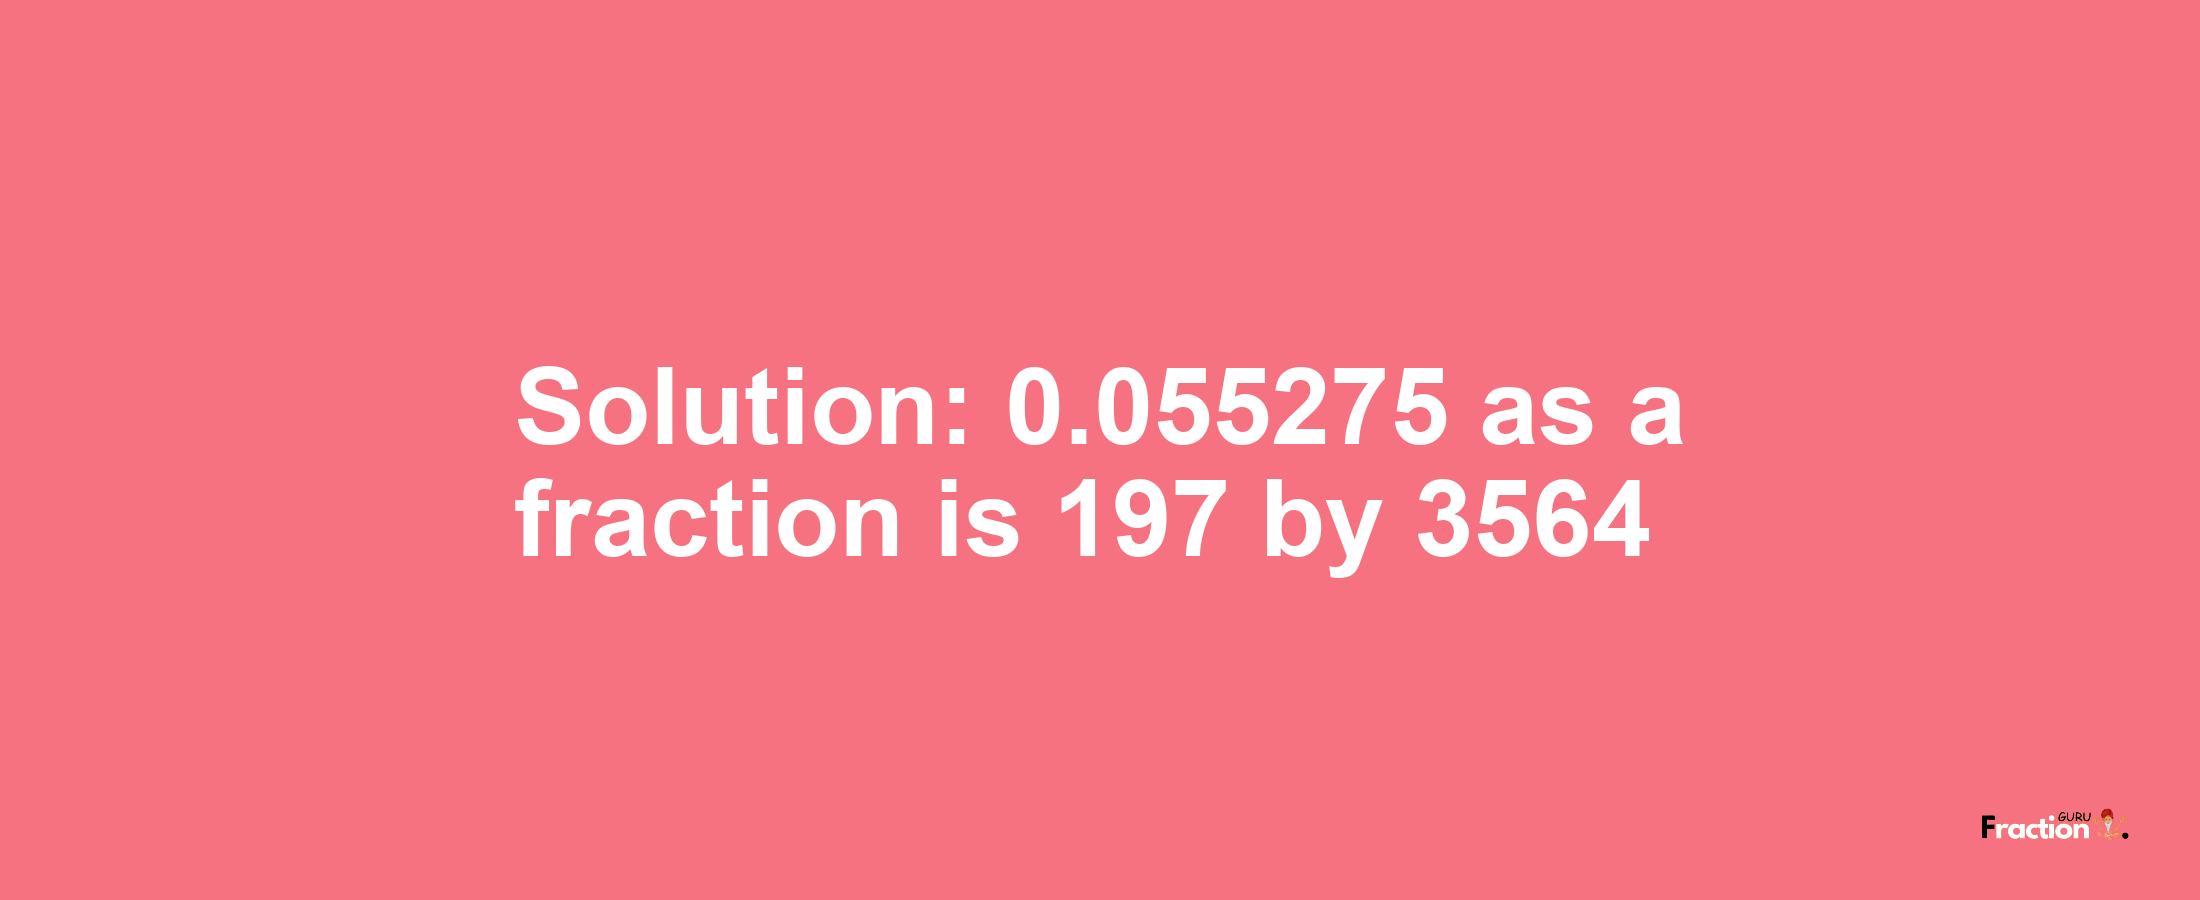 Solution:0.055275 as a fraction is 197/3564